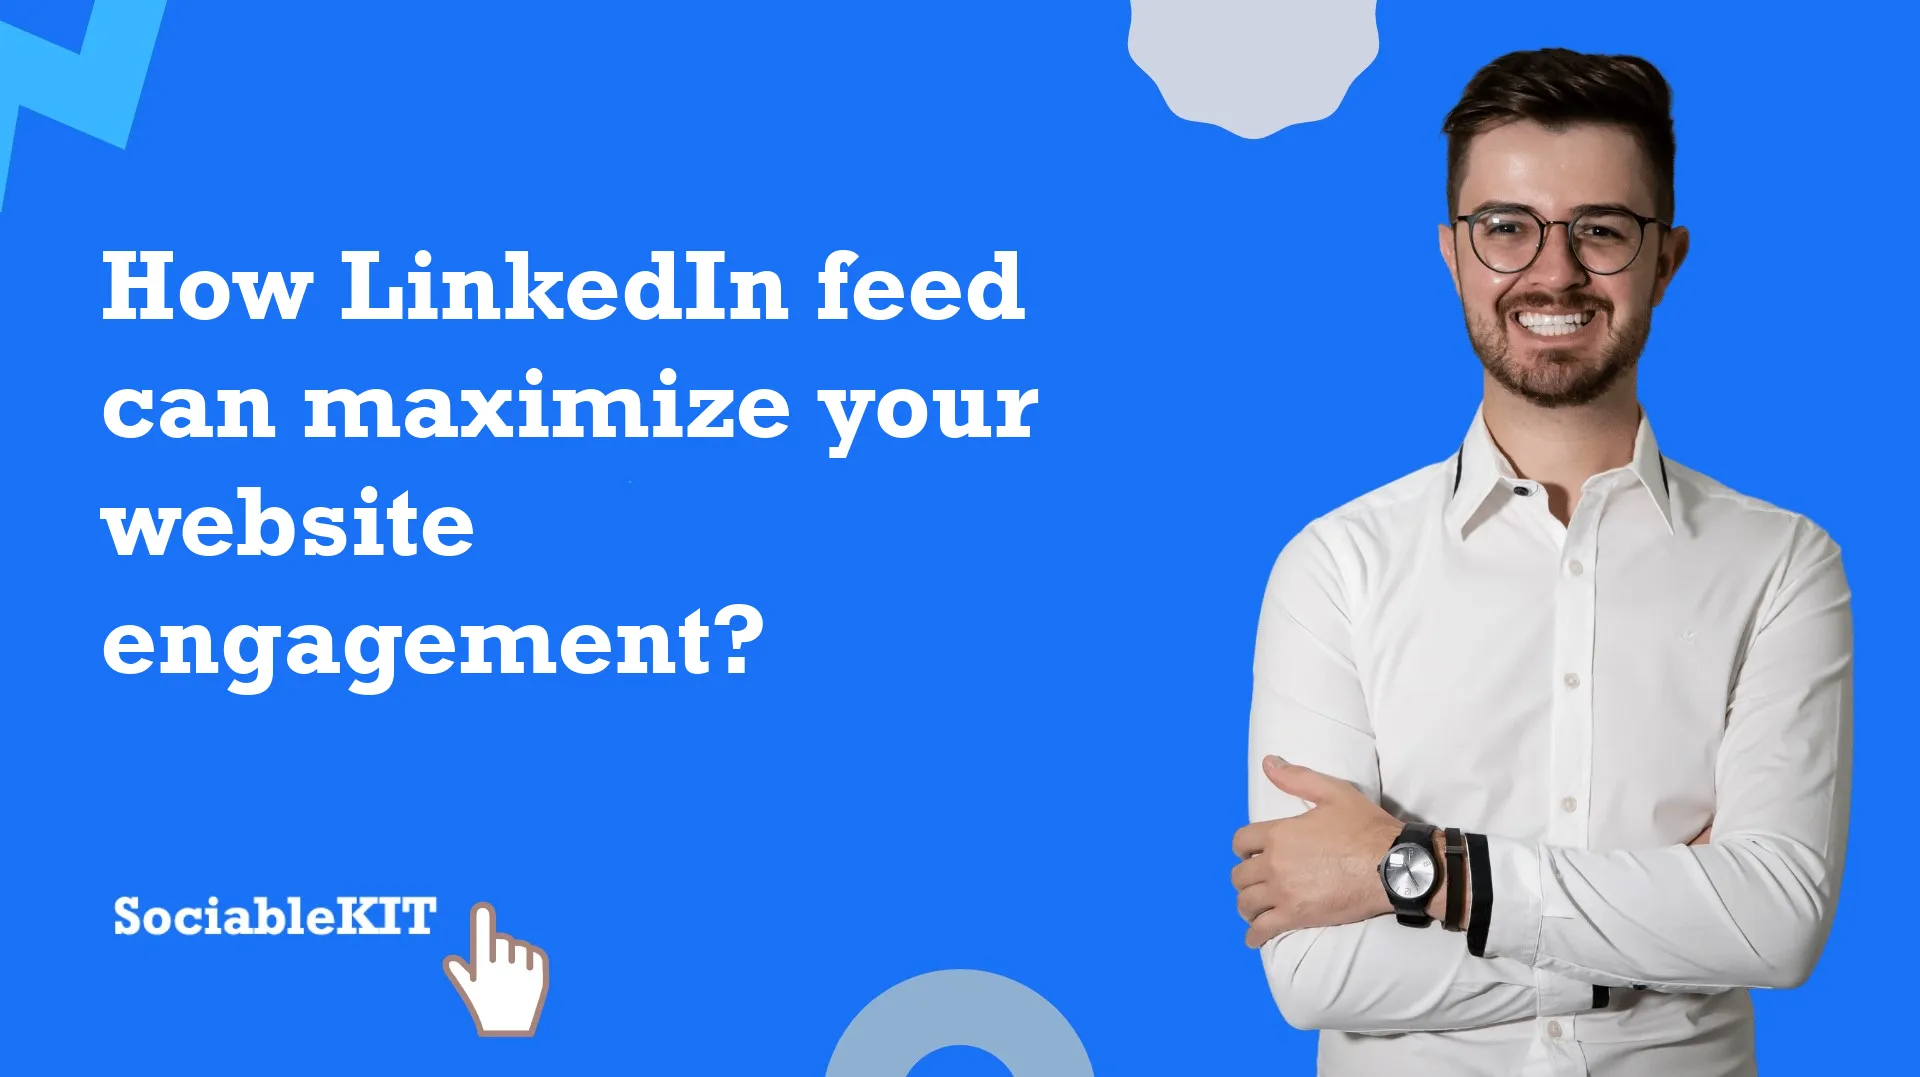 How LinkedIn feed can maximize your website engagement?